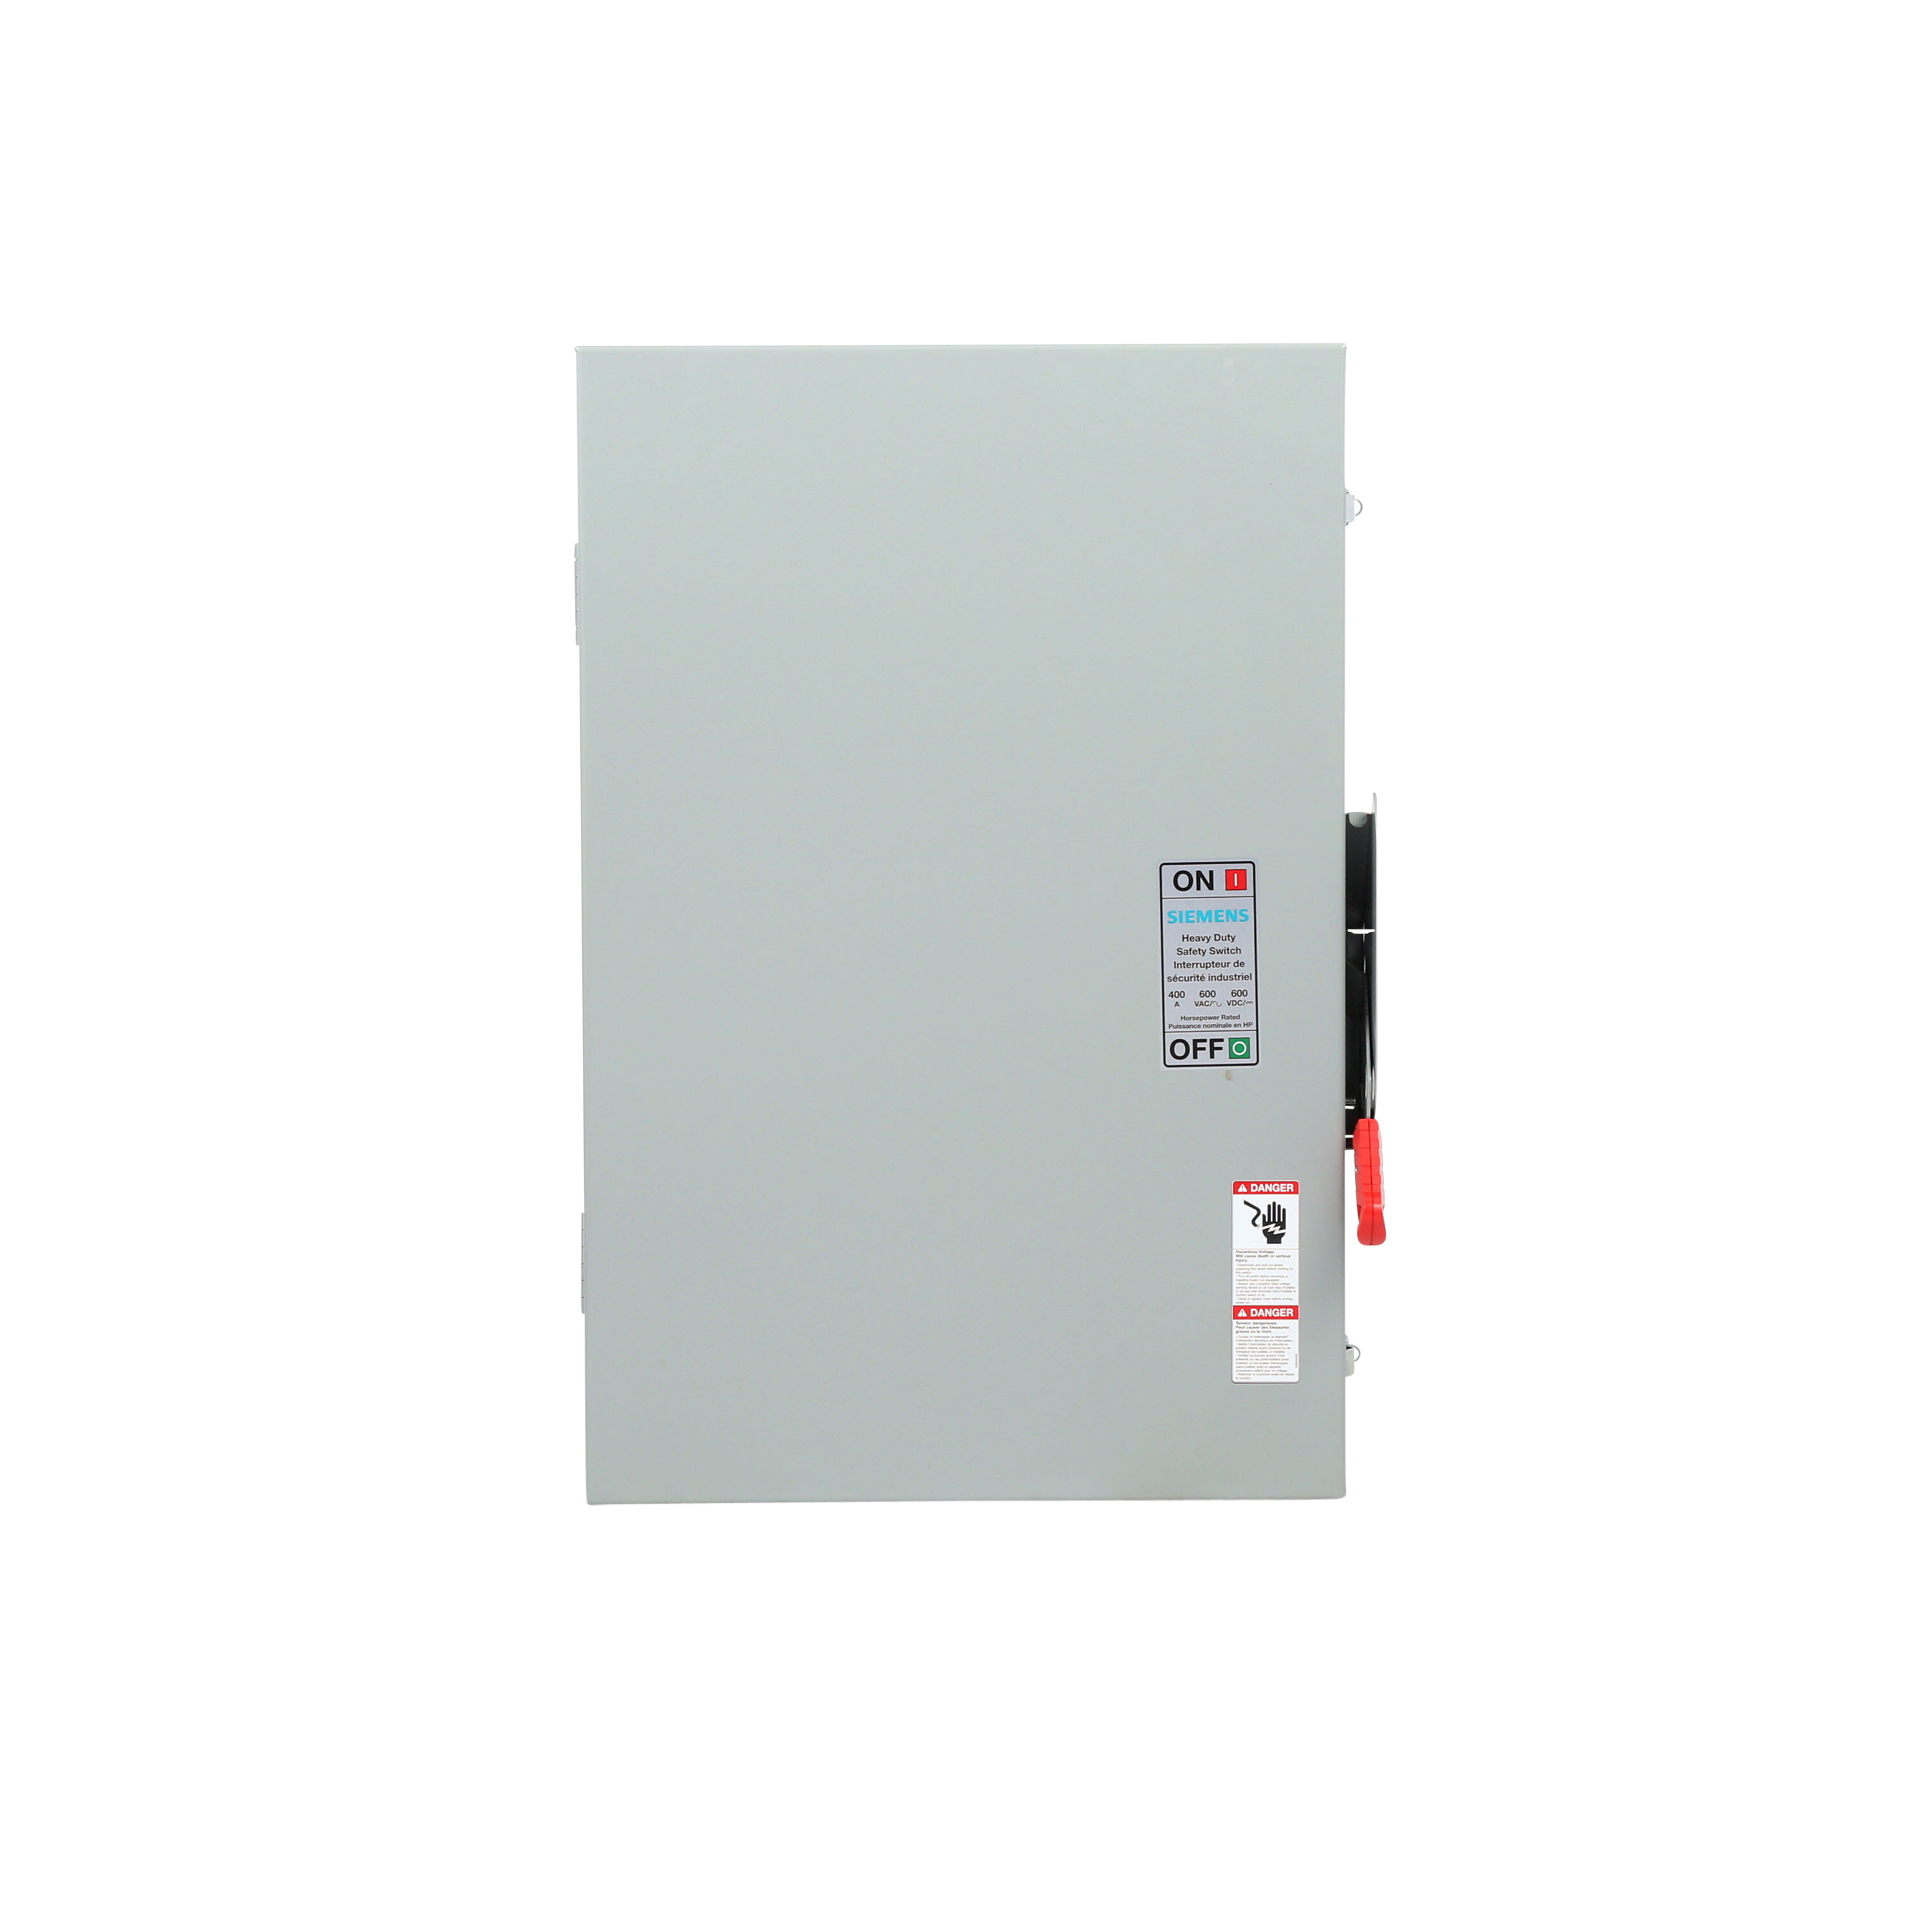 Siemens Low Voltage Circuit Protection Heavy Duty Safety Switch. 3-Pole Non-Fused in a type 1 enclosure (indoor). Rated 600VAC (400A).